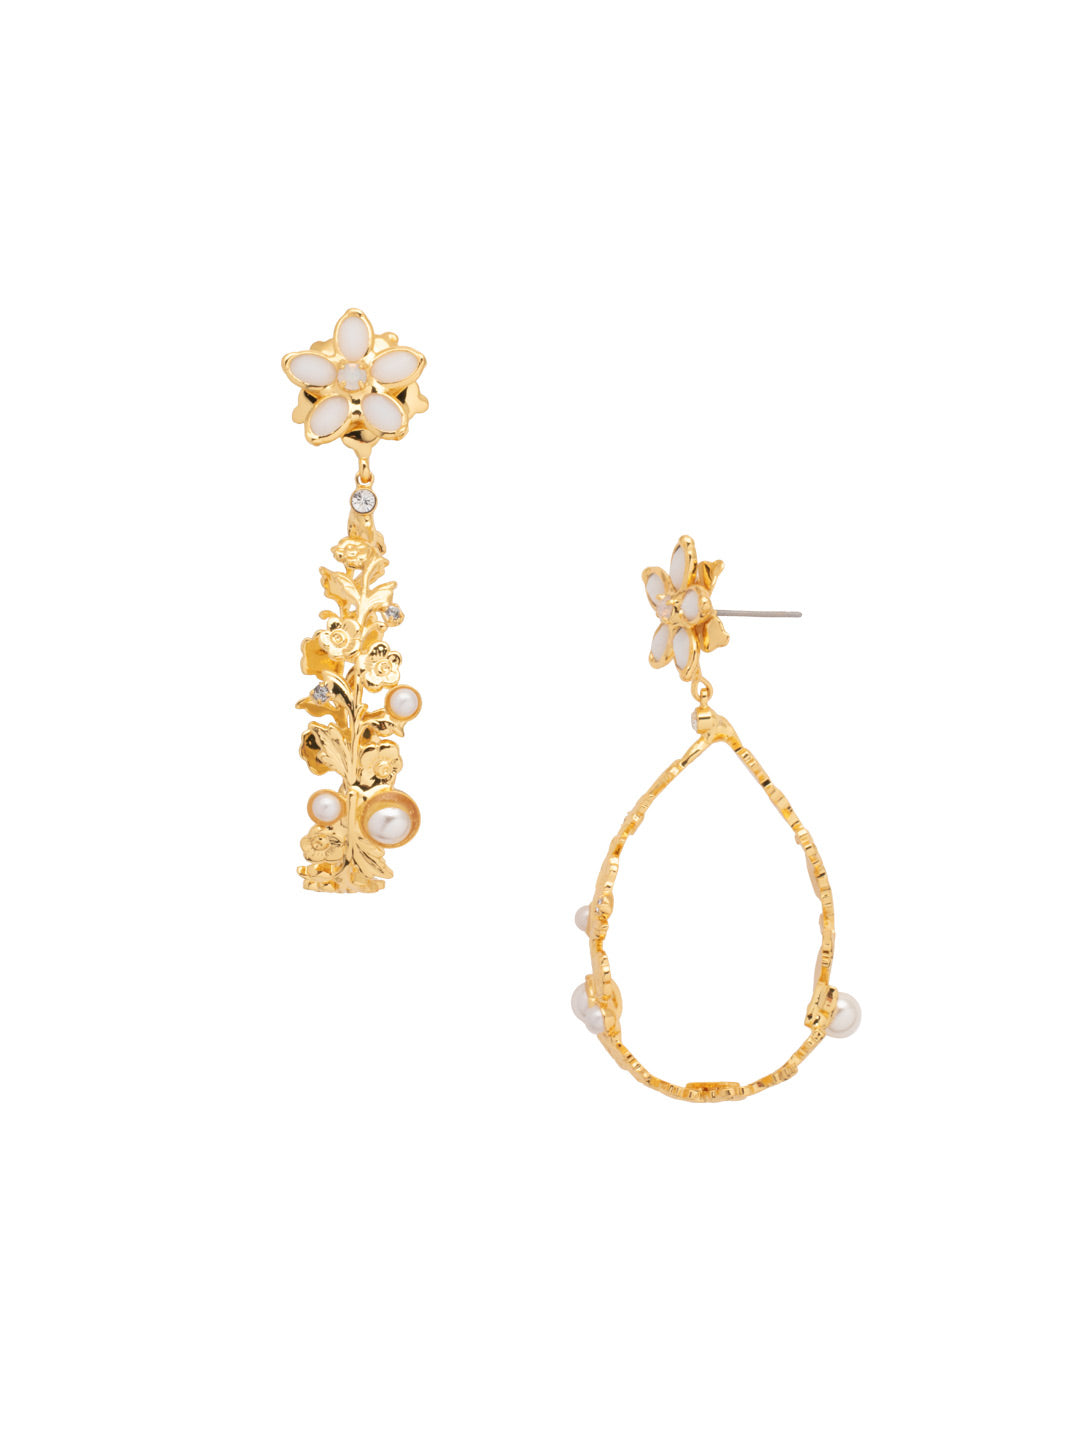 Whimsy Dangle Earring - EET92BGMDP - <p>The Whimsy Dangle Earrings feature a pearl and floral embellished drop hoop dangling from a metal flower on a post. From Sorrelli's Modern Pearl collection in our Bright Gold-tone finish.</p>